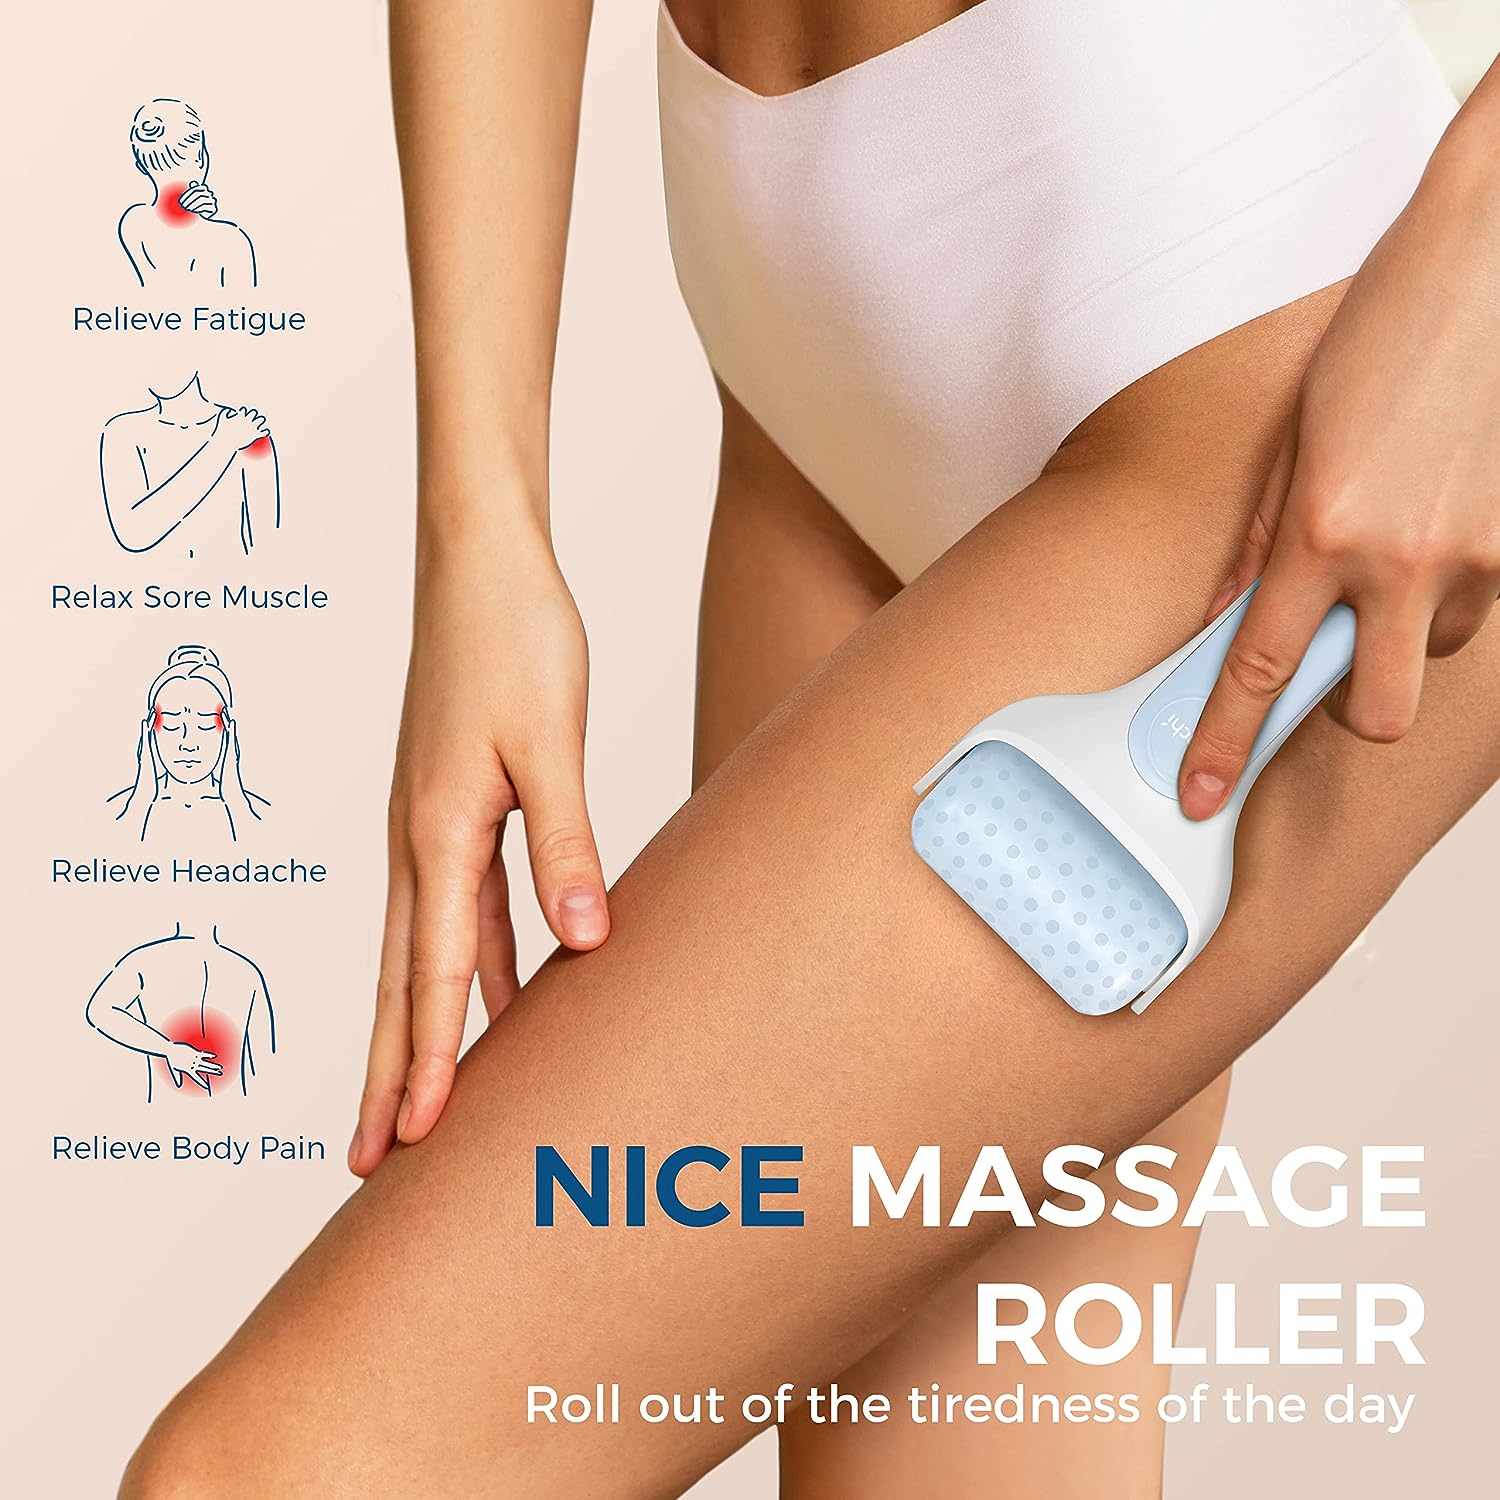 A woman is using Massage Body Ice Roller to massage her legs, Relieve Fatigue, Relax Sore Muscle, Relieve Headache, Relieve Body Pain